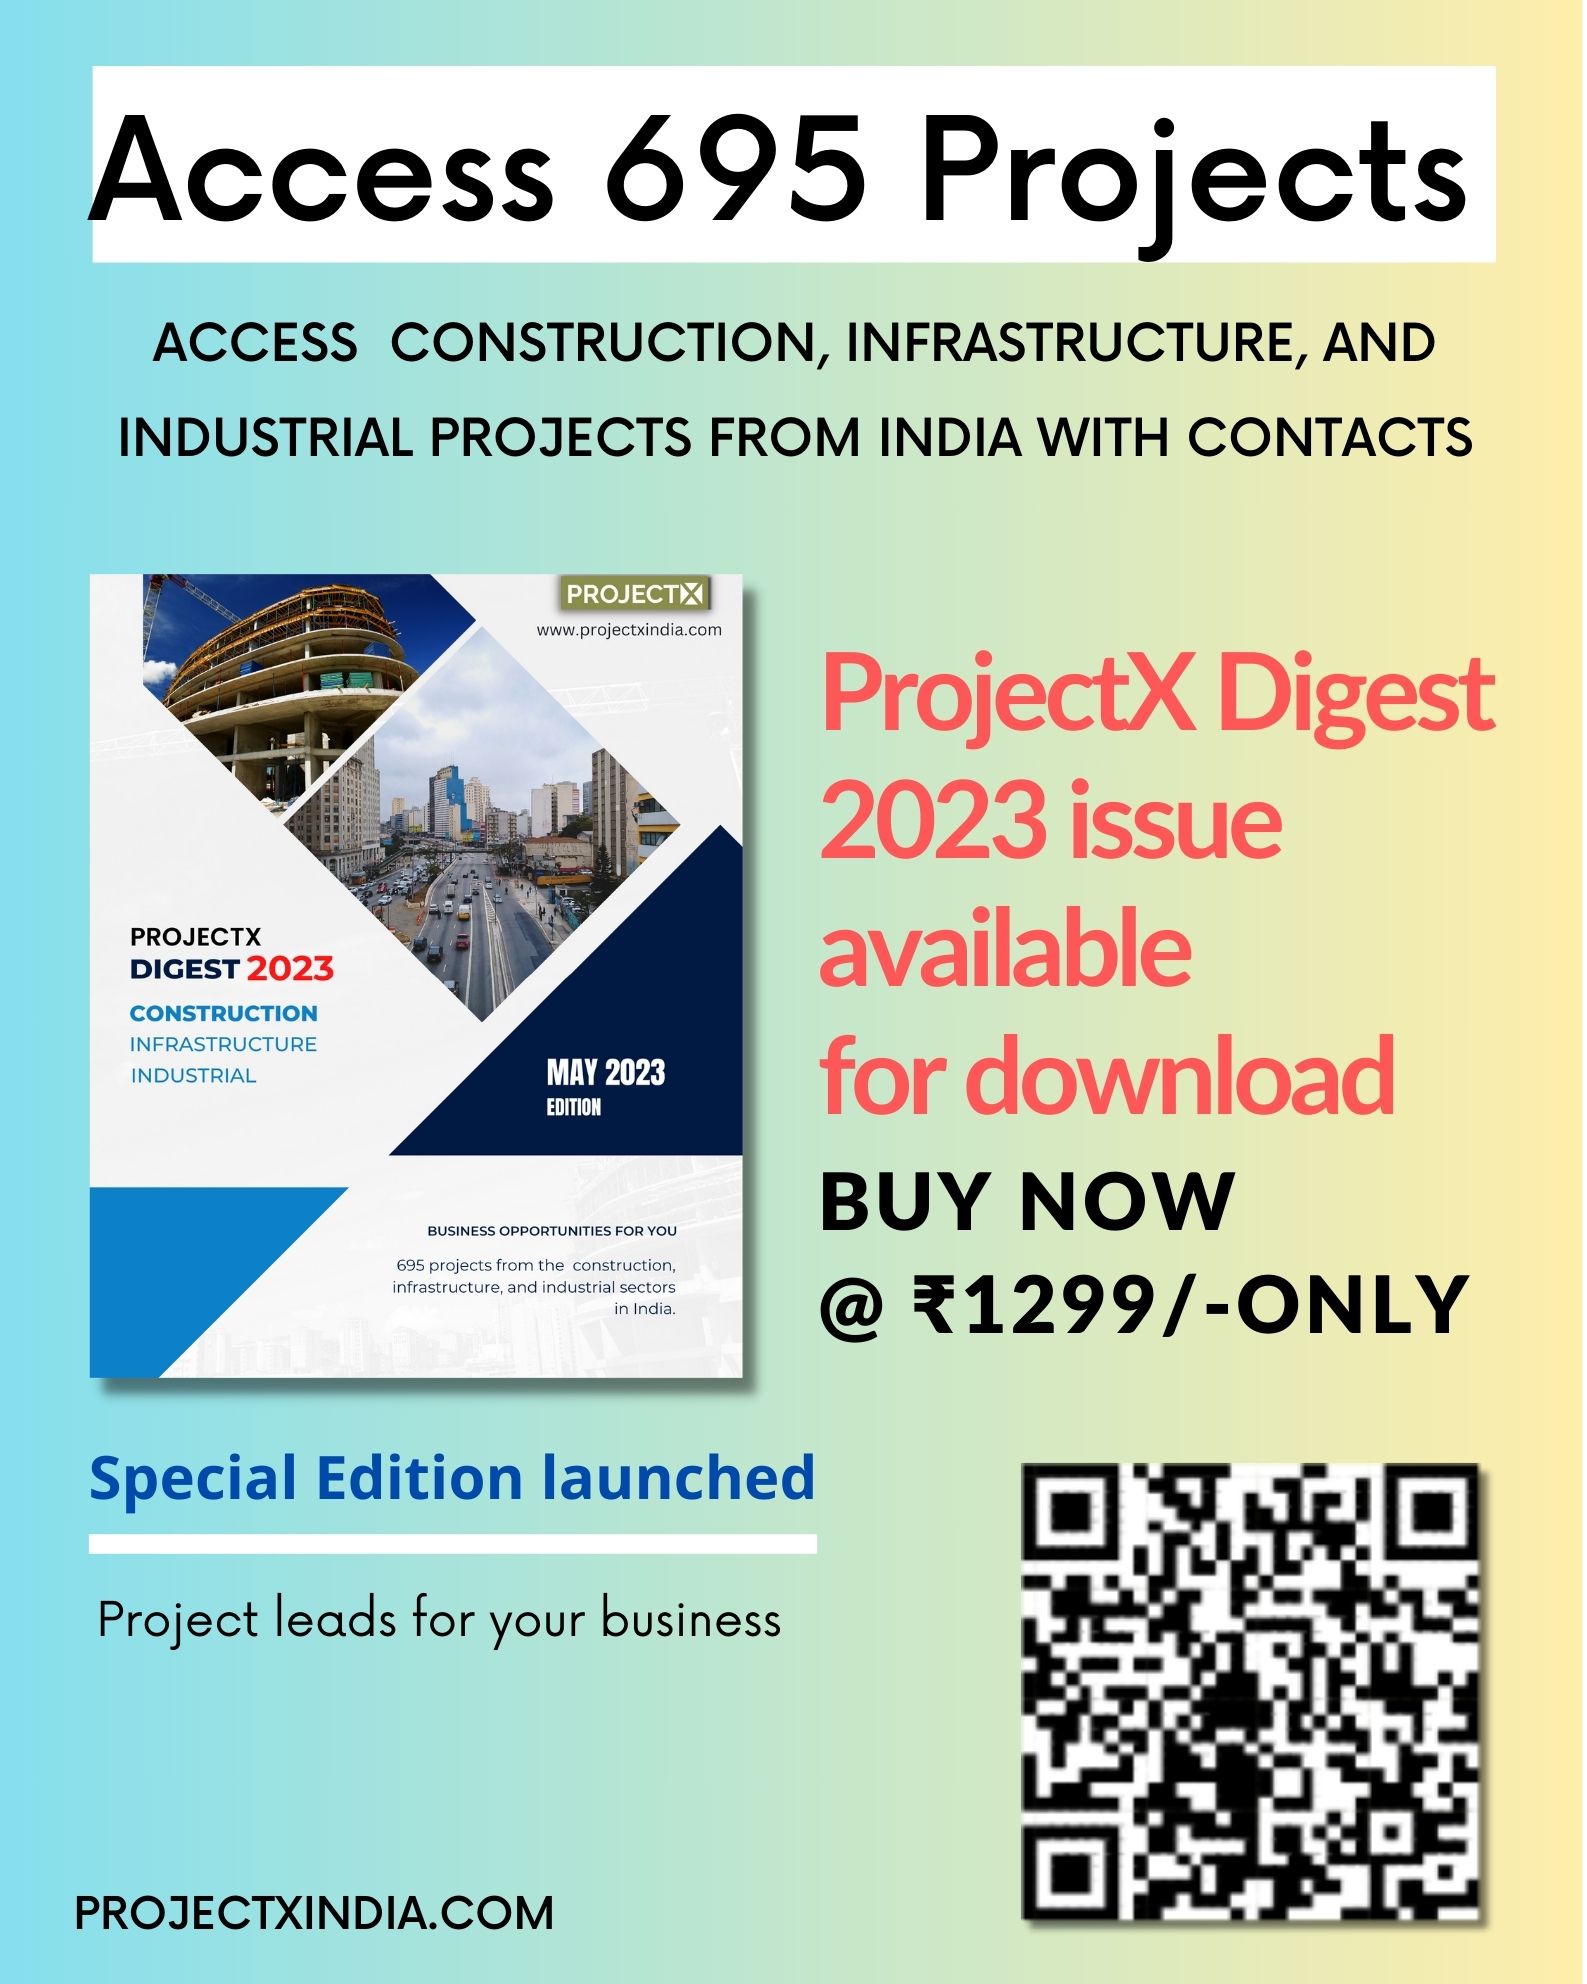 Buy ProjectX Digest 2023 @ Rs 1299/- only